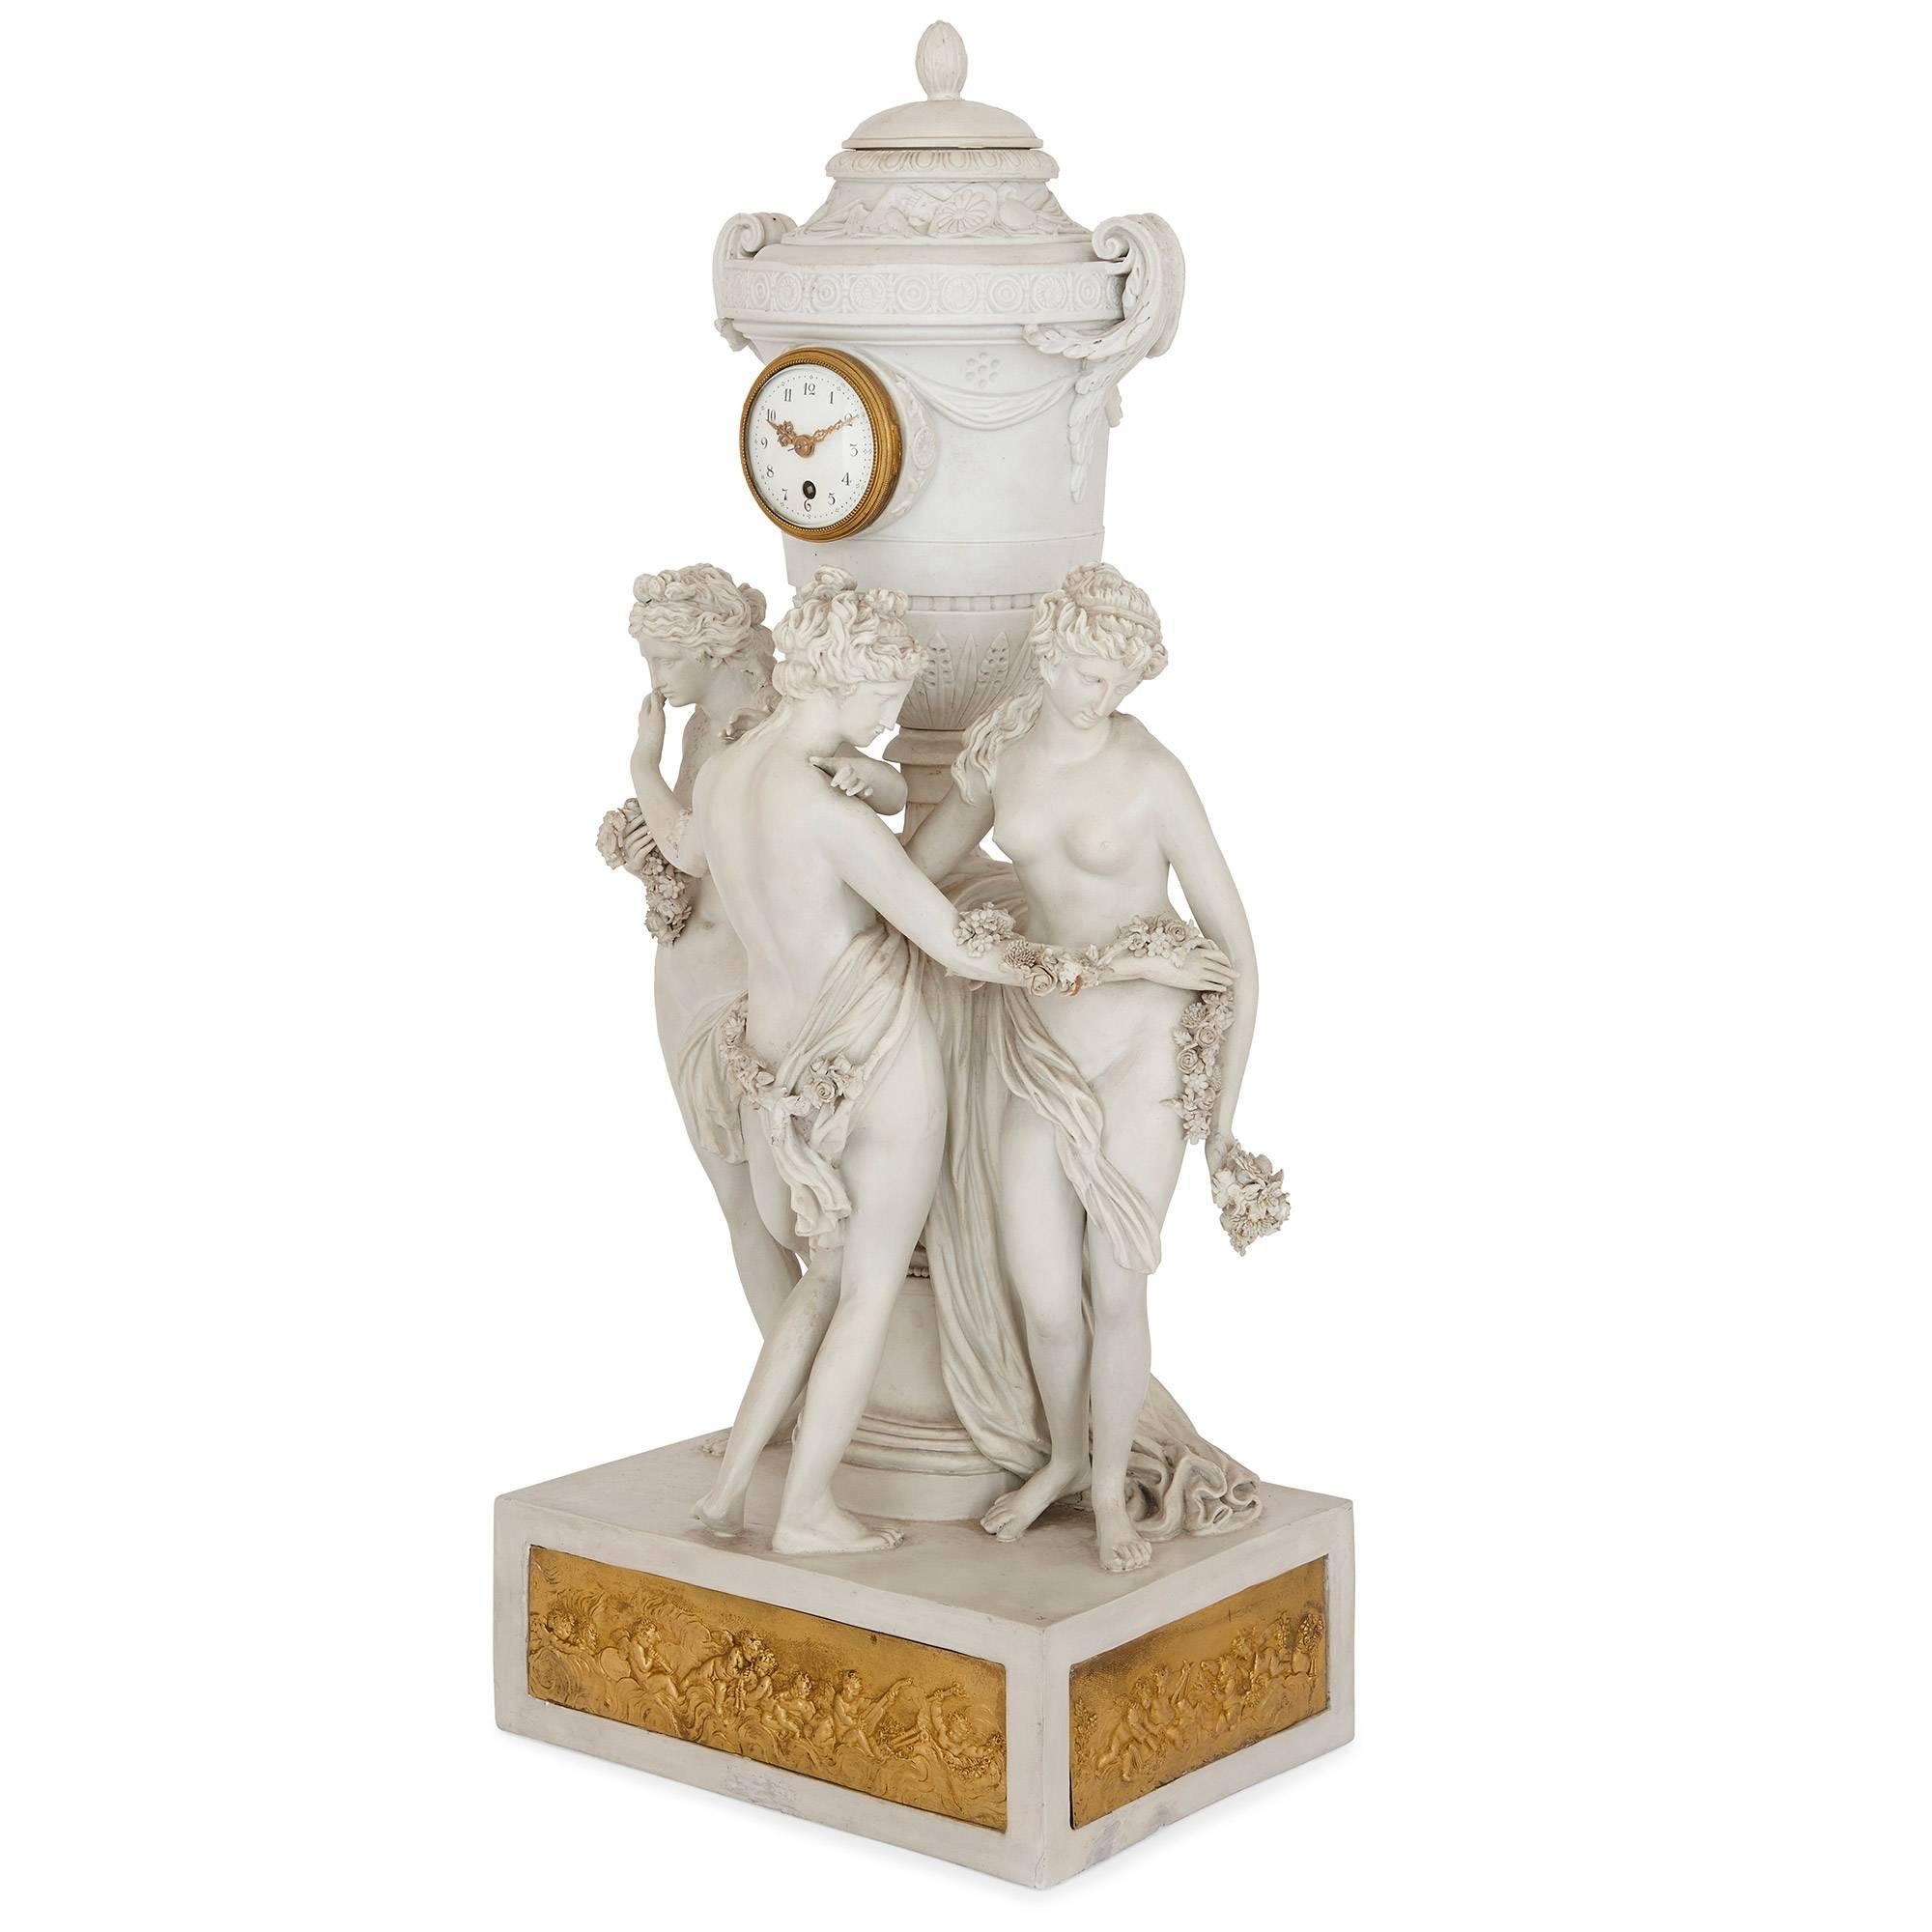 This exquisite and delicate mantel clock depicts the Three Graces, who were the daughters of Zeus from Classical mythology, and is made from bisque porcelain with ormolu details. The clock has a rectangular porcelain base, which has ormolu plaques